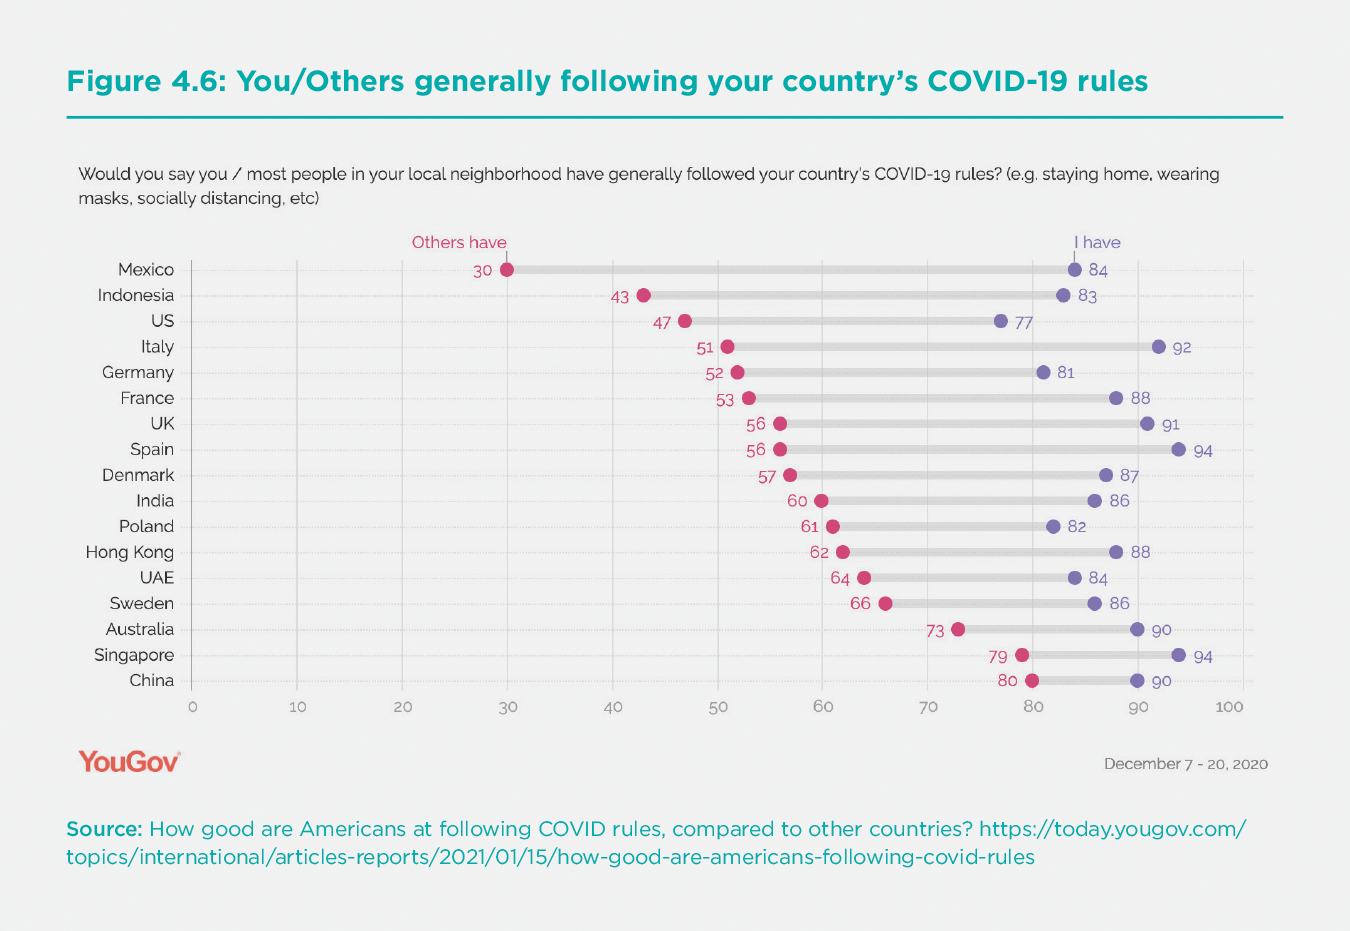 Figure 4.6. You/Others Generally Following Your Country's COVID-19 Rules